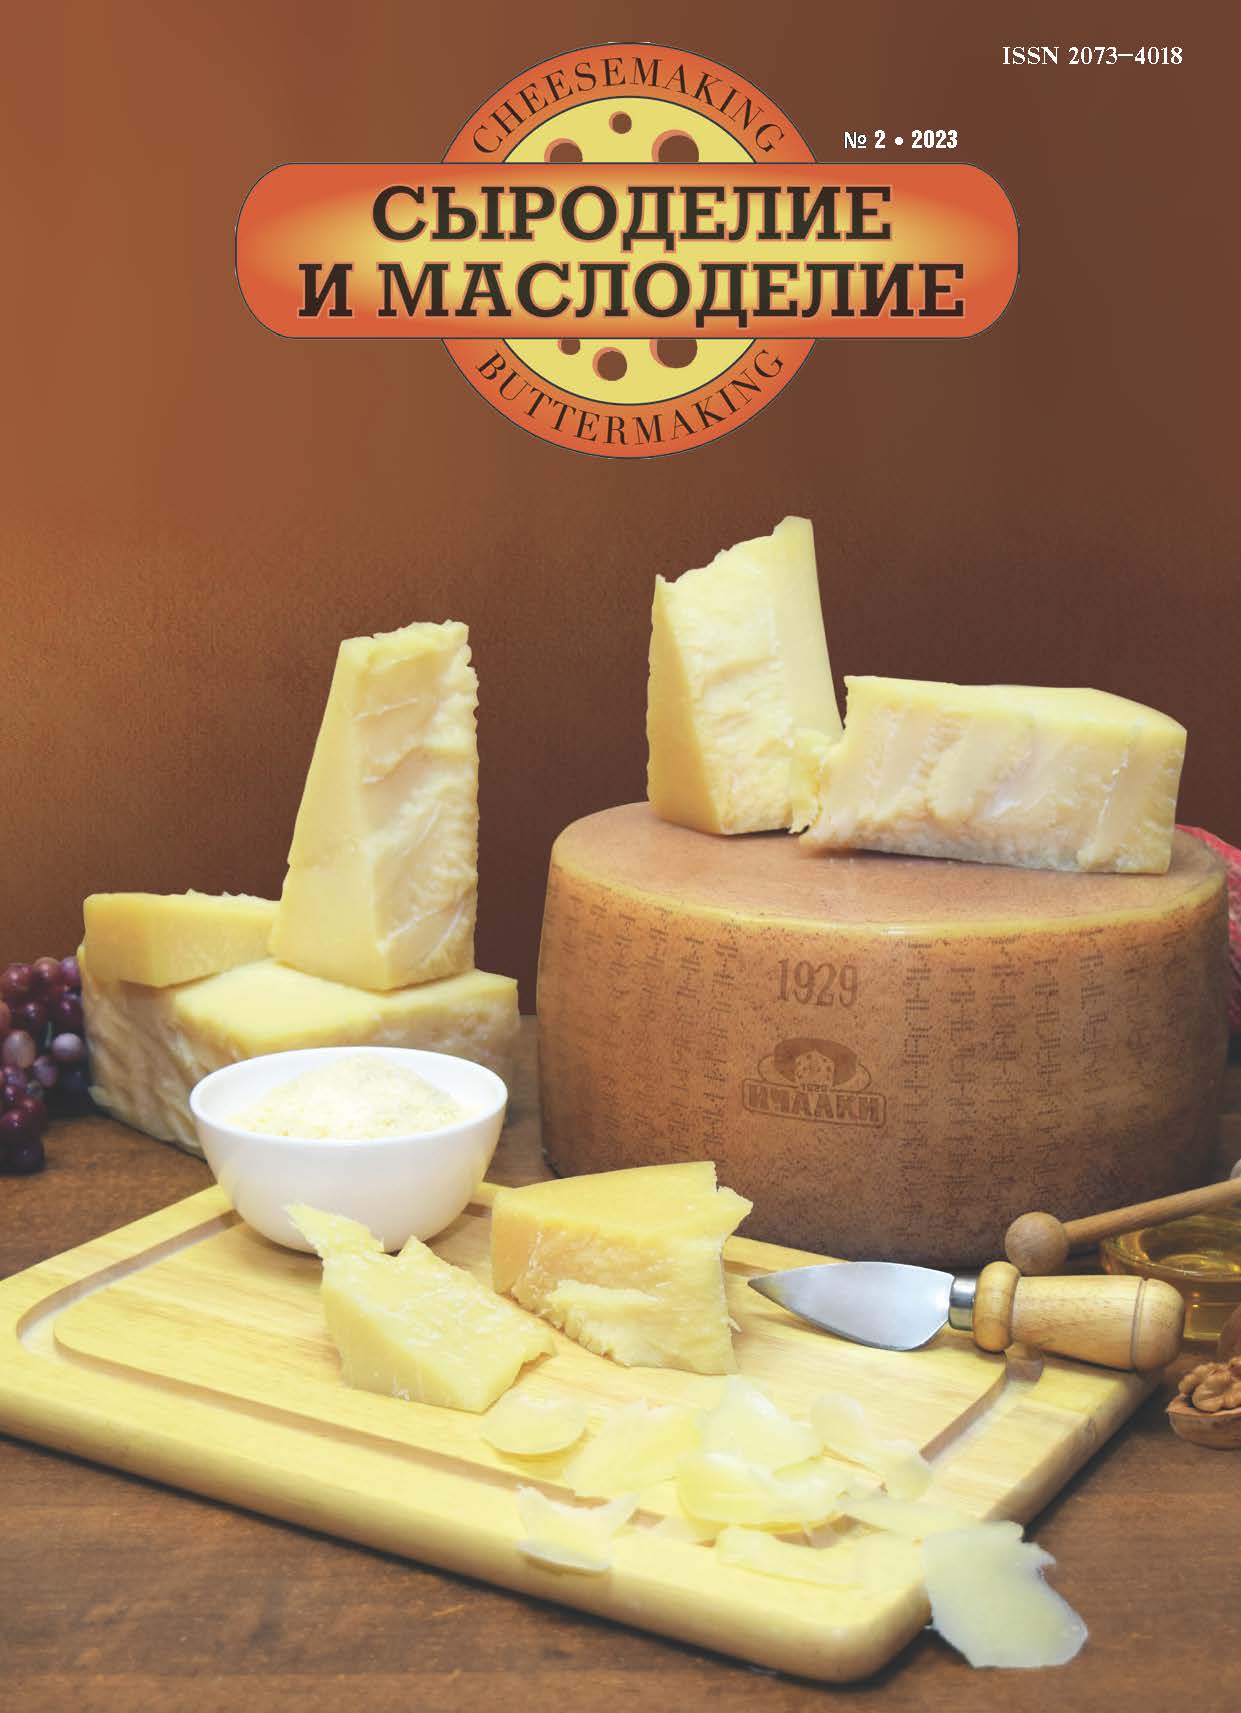                         Selenium enrichment of soft cheeses maturing with noble mold
            